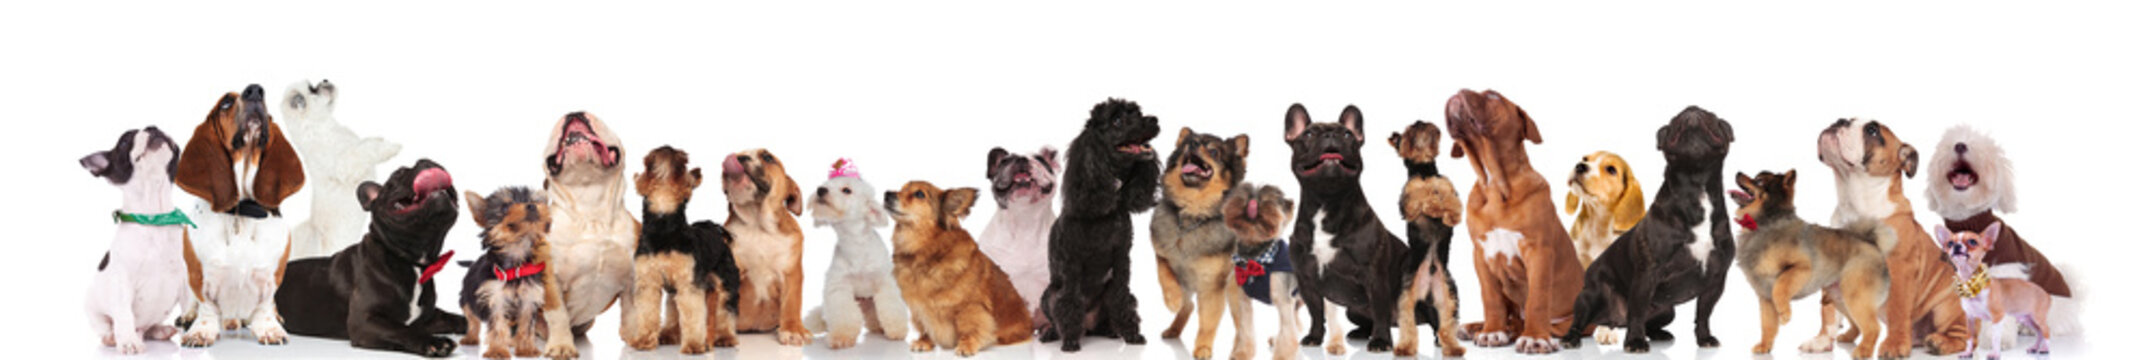 large team of dogs with bowties and collars looking up